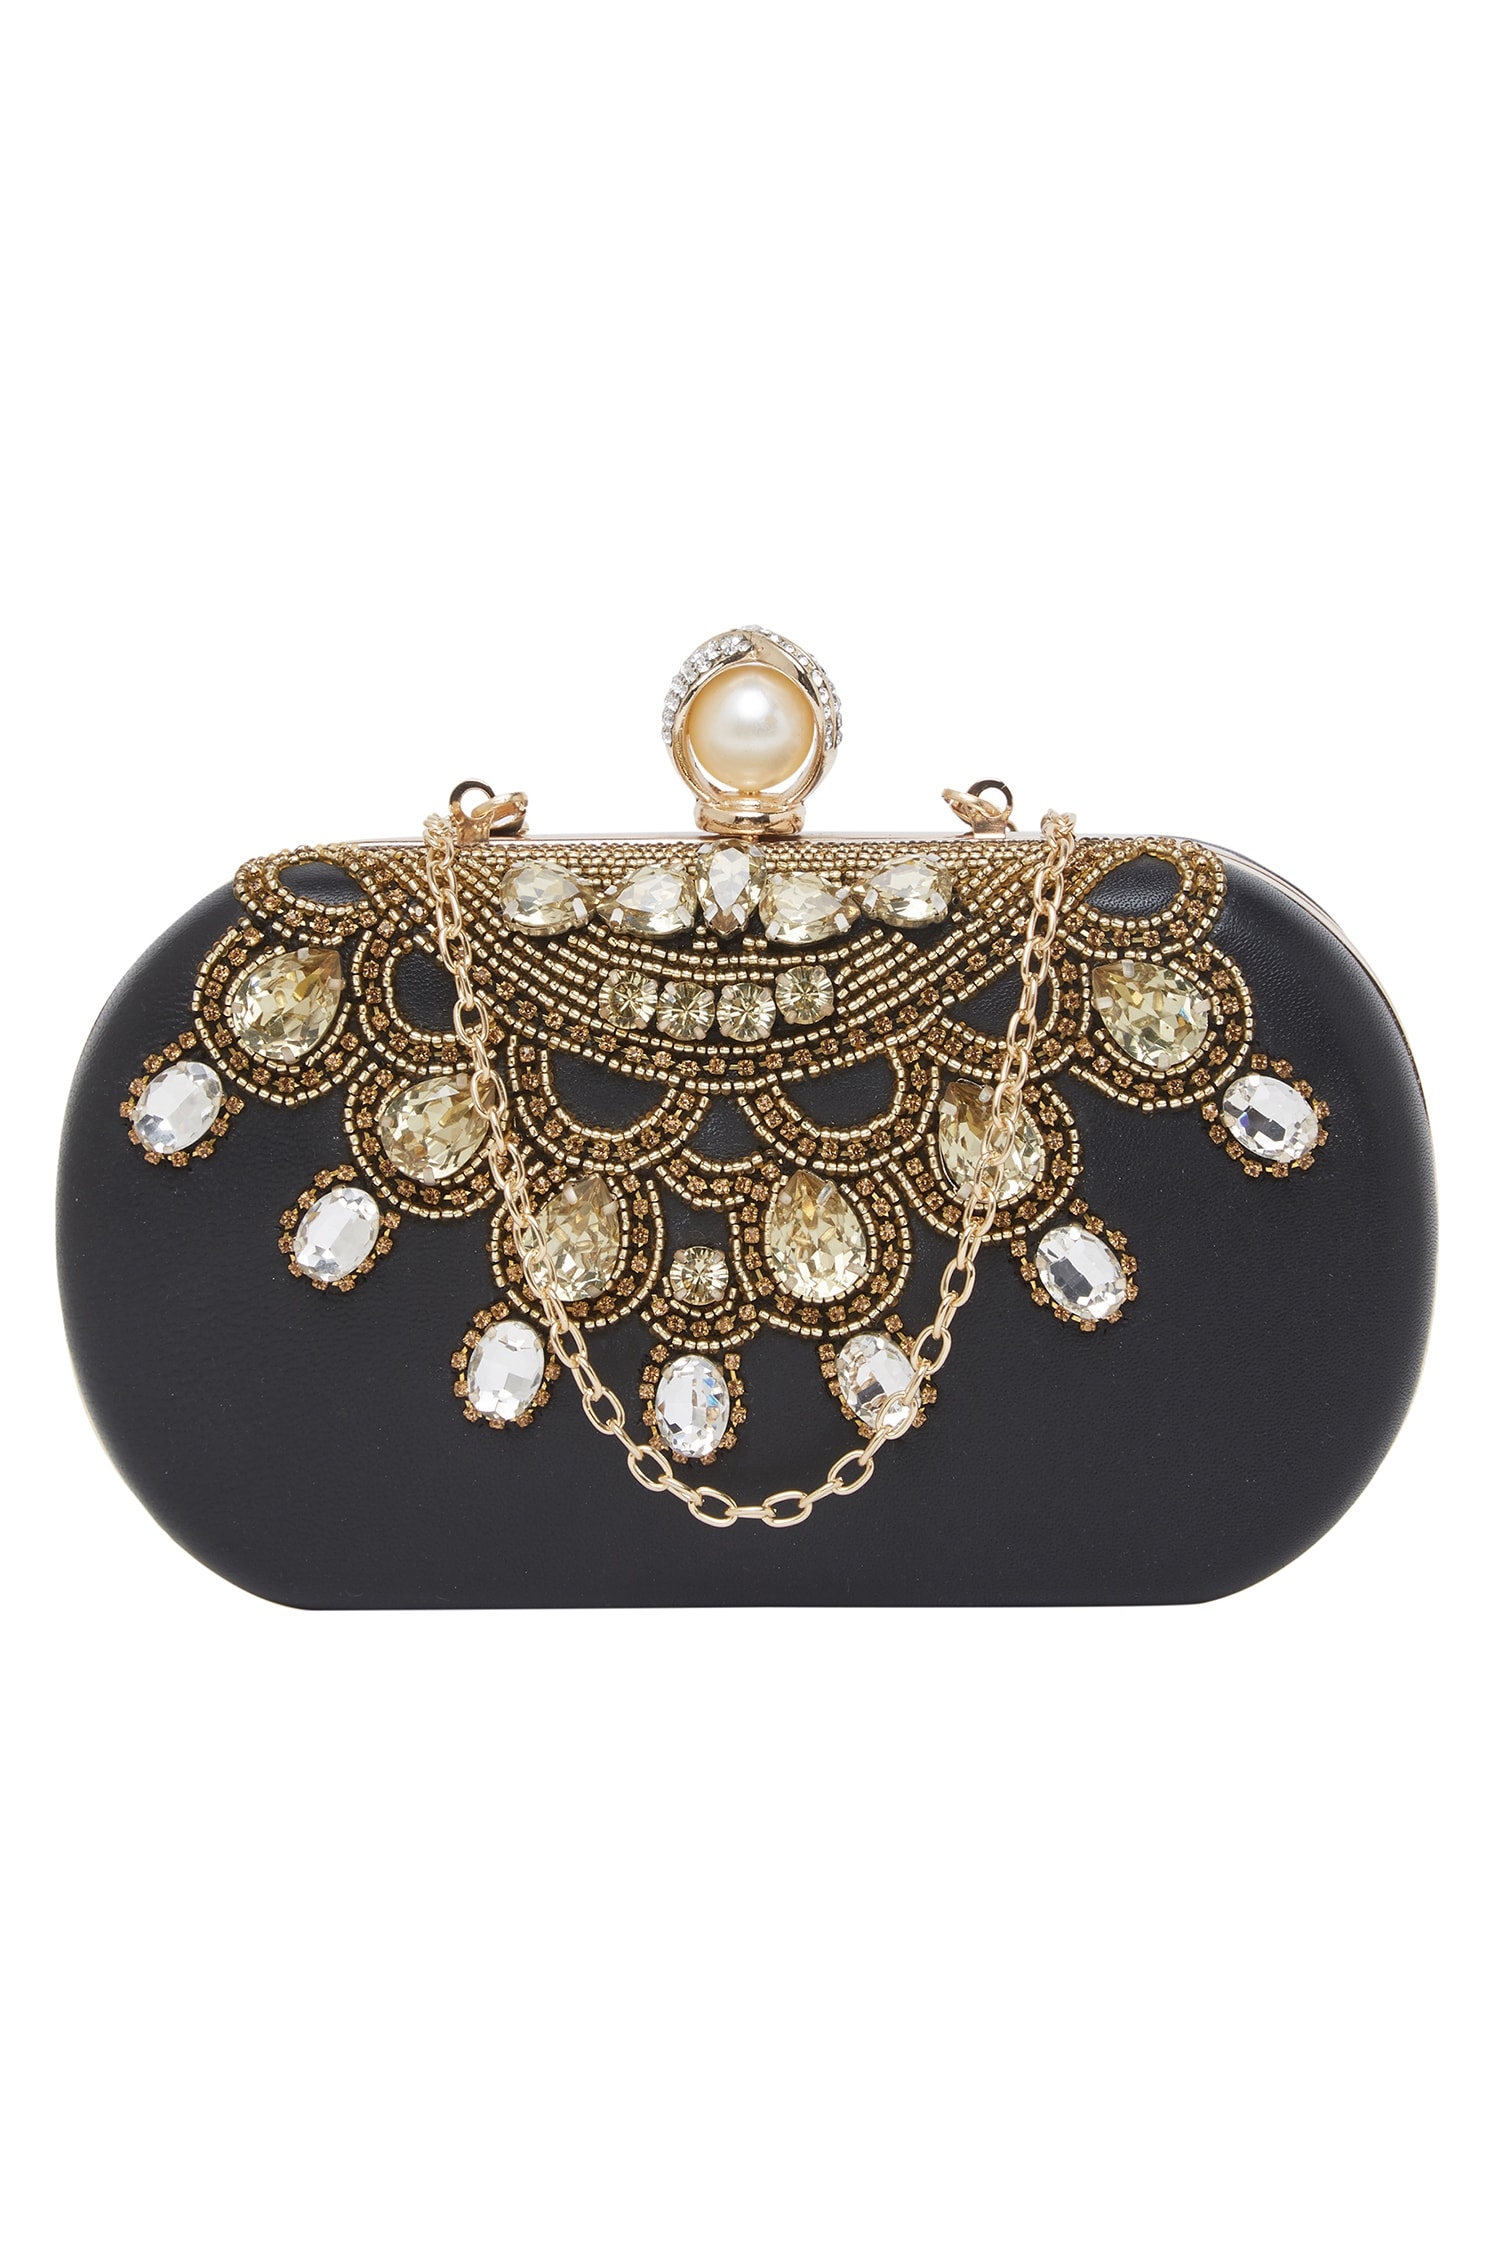 Buy Richa Gupta Leather Embroidered Clutch With Sling Online | Aza Fashions